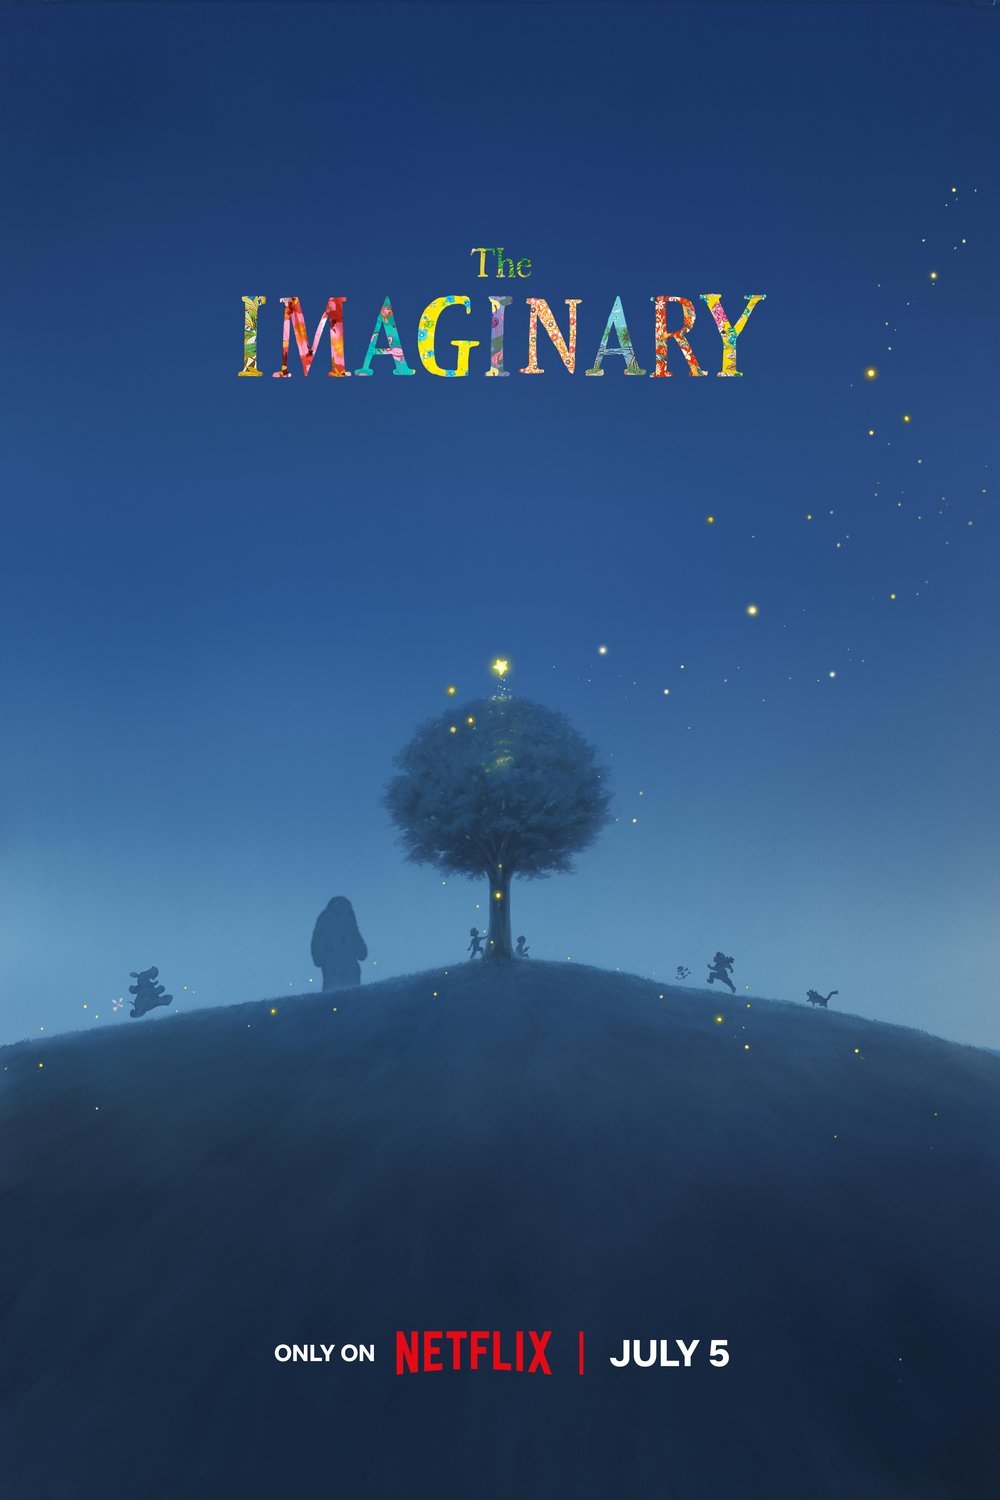 Japanese poster of the movie The Imaginary